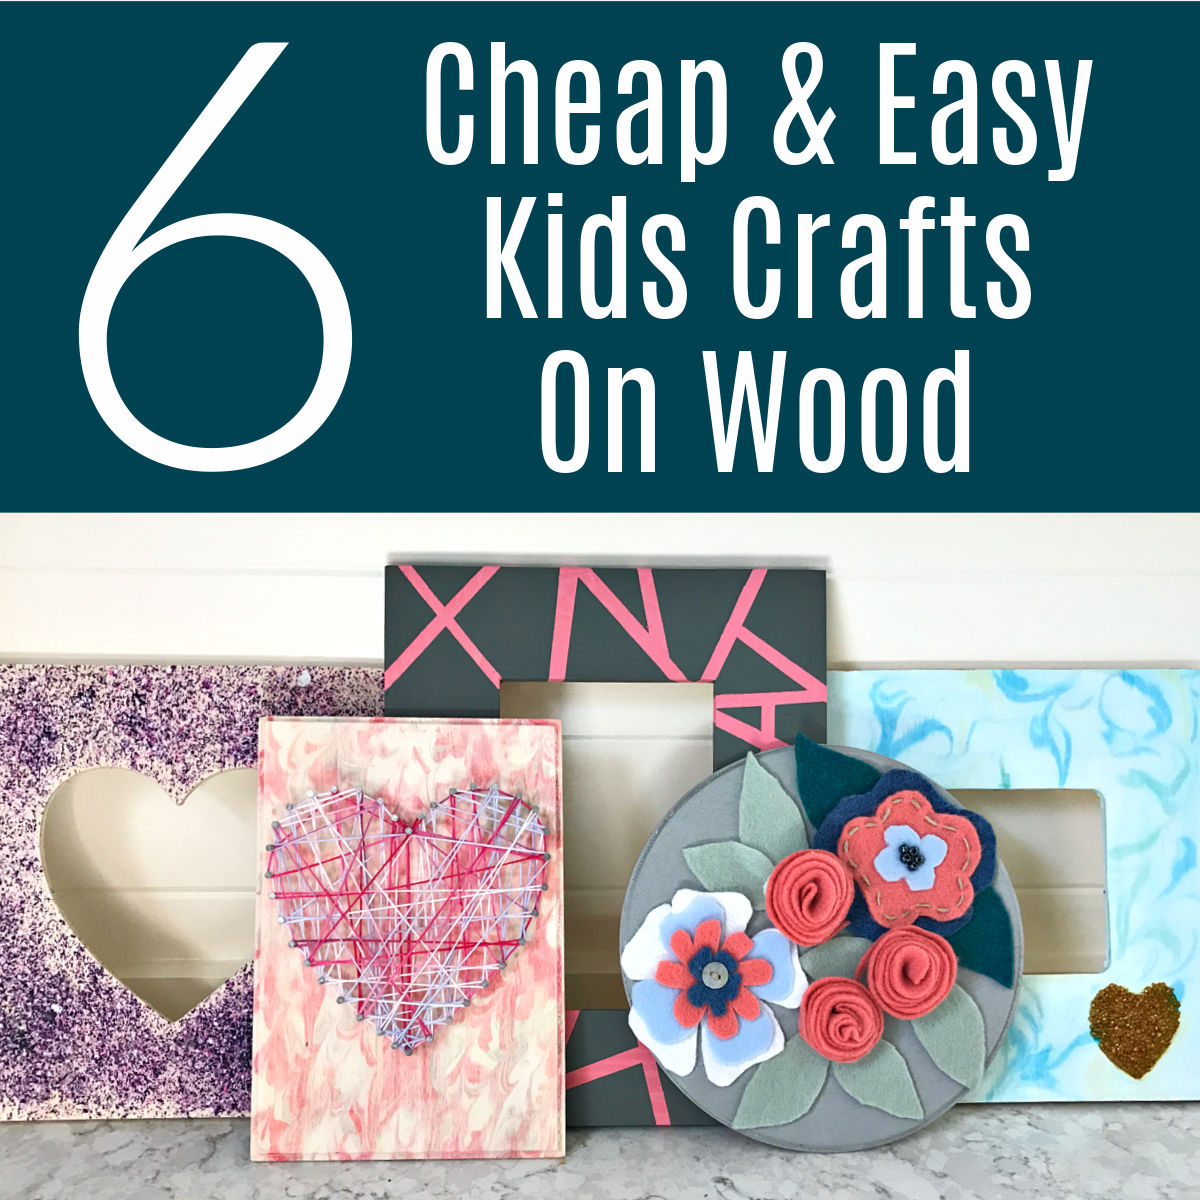 Looking for a fun new craft idea for your kids? Here's 6 easy and cheap Kids Crafts on $1 wood plaques & frames. Dollar Tree Kids Craft Ideas on wood.